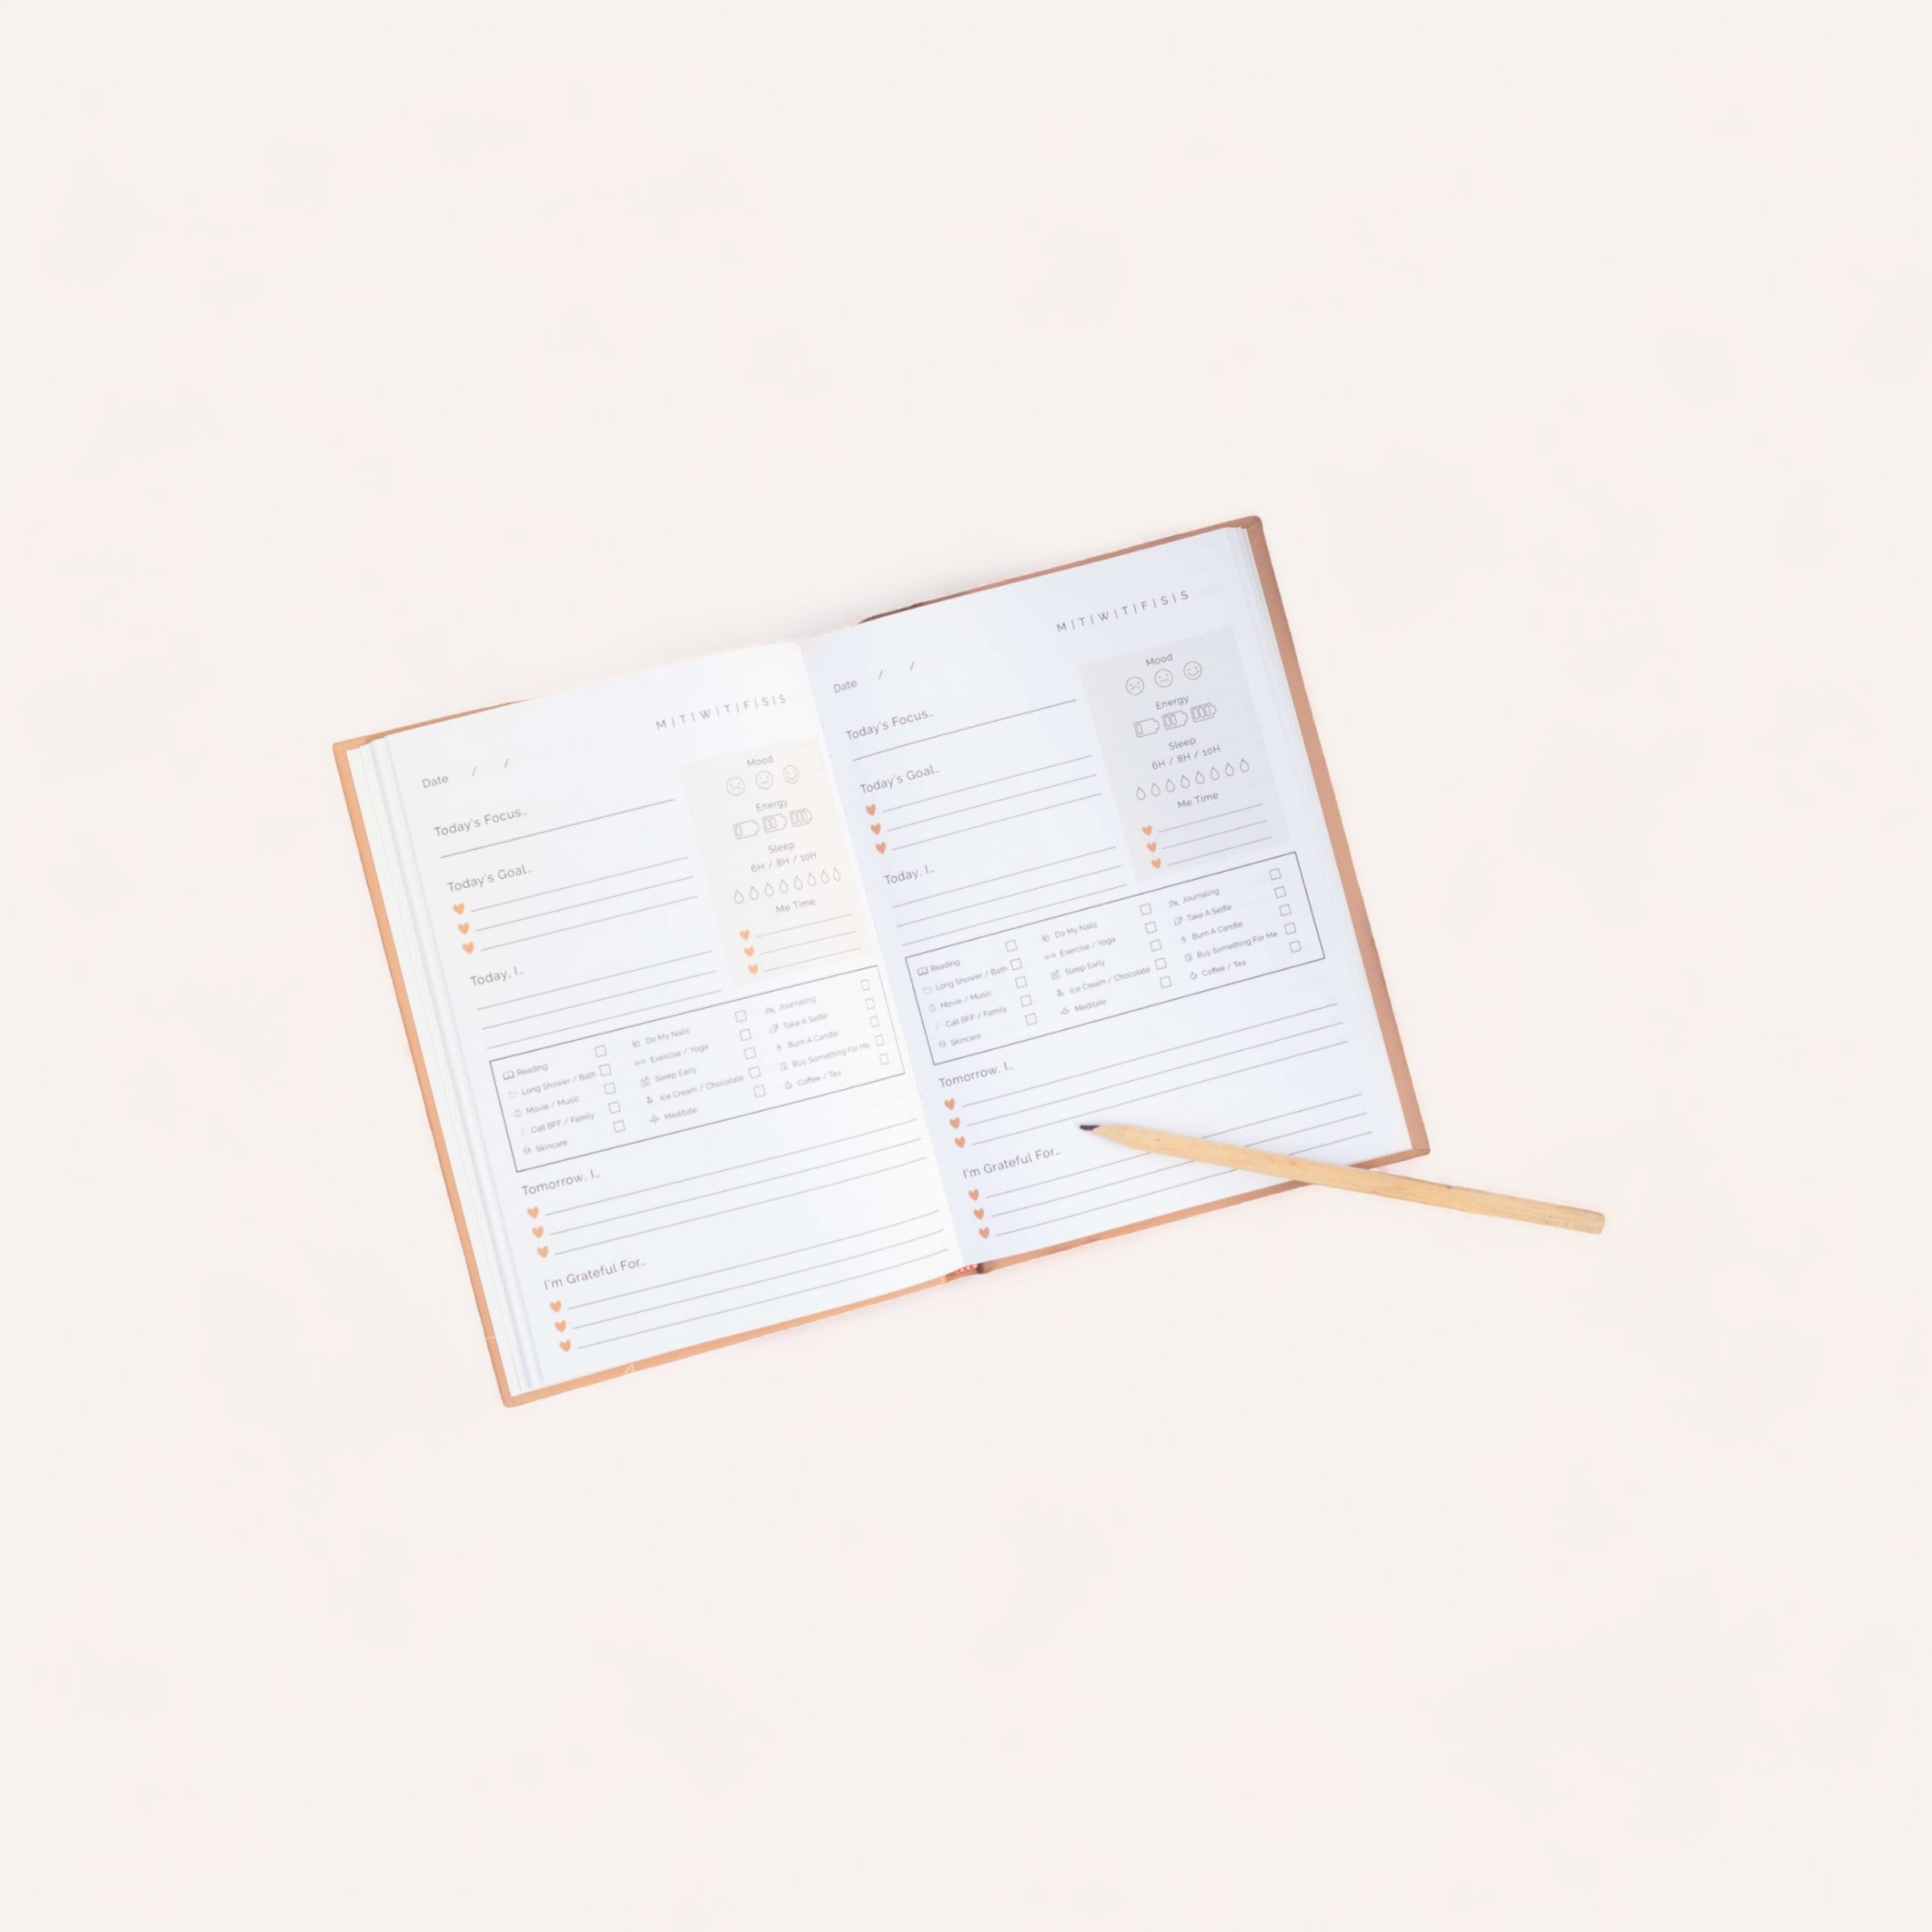 An open Skye self-care journal planner with a to-do list and schedule alongside a pencil, neatly arranged on a plain background.